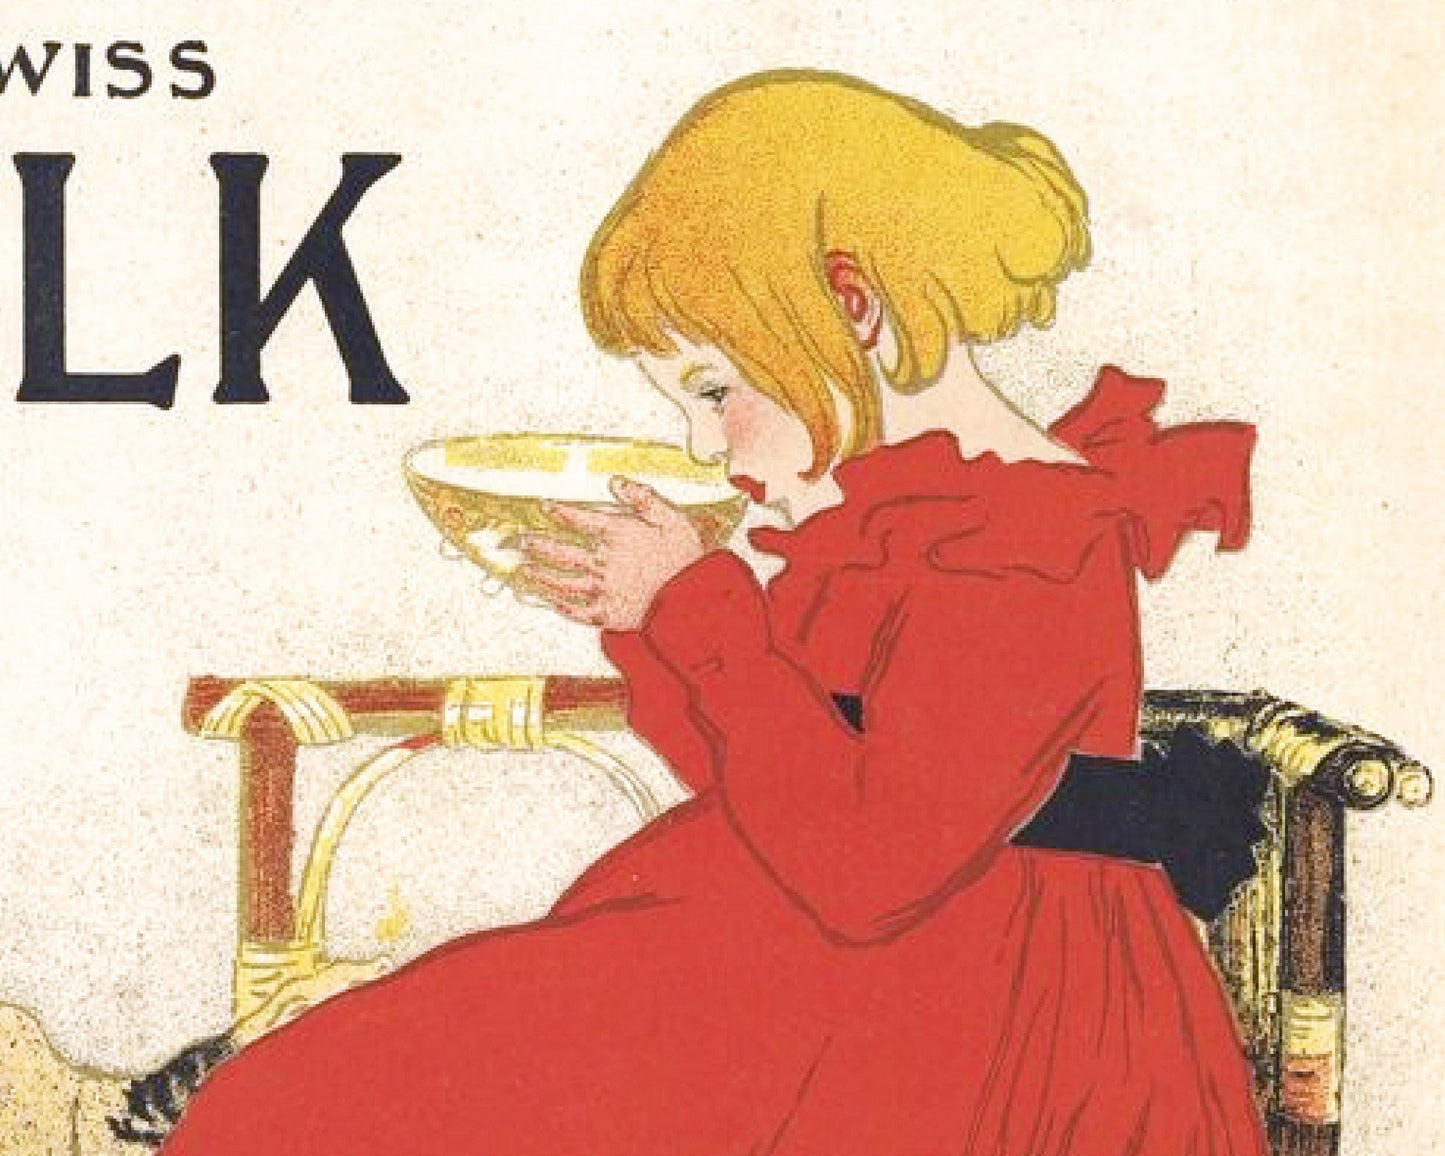 Nestle's milk ad | Girl in red dress with cats | Theophile Steinlen print | Kitchen, food wall art | Vintage advertisement